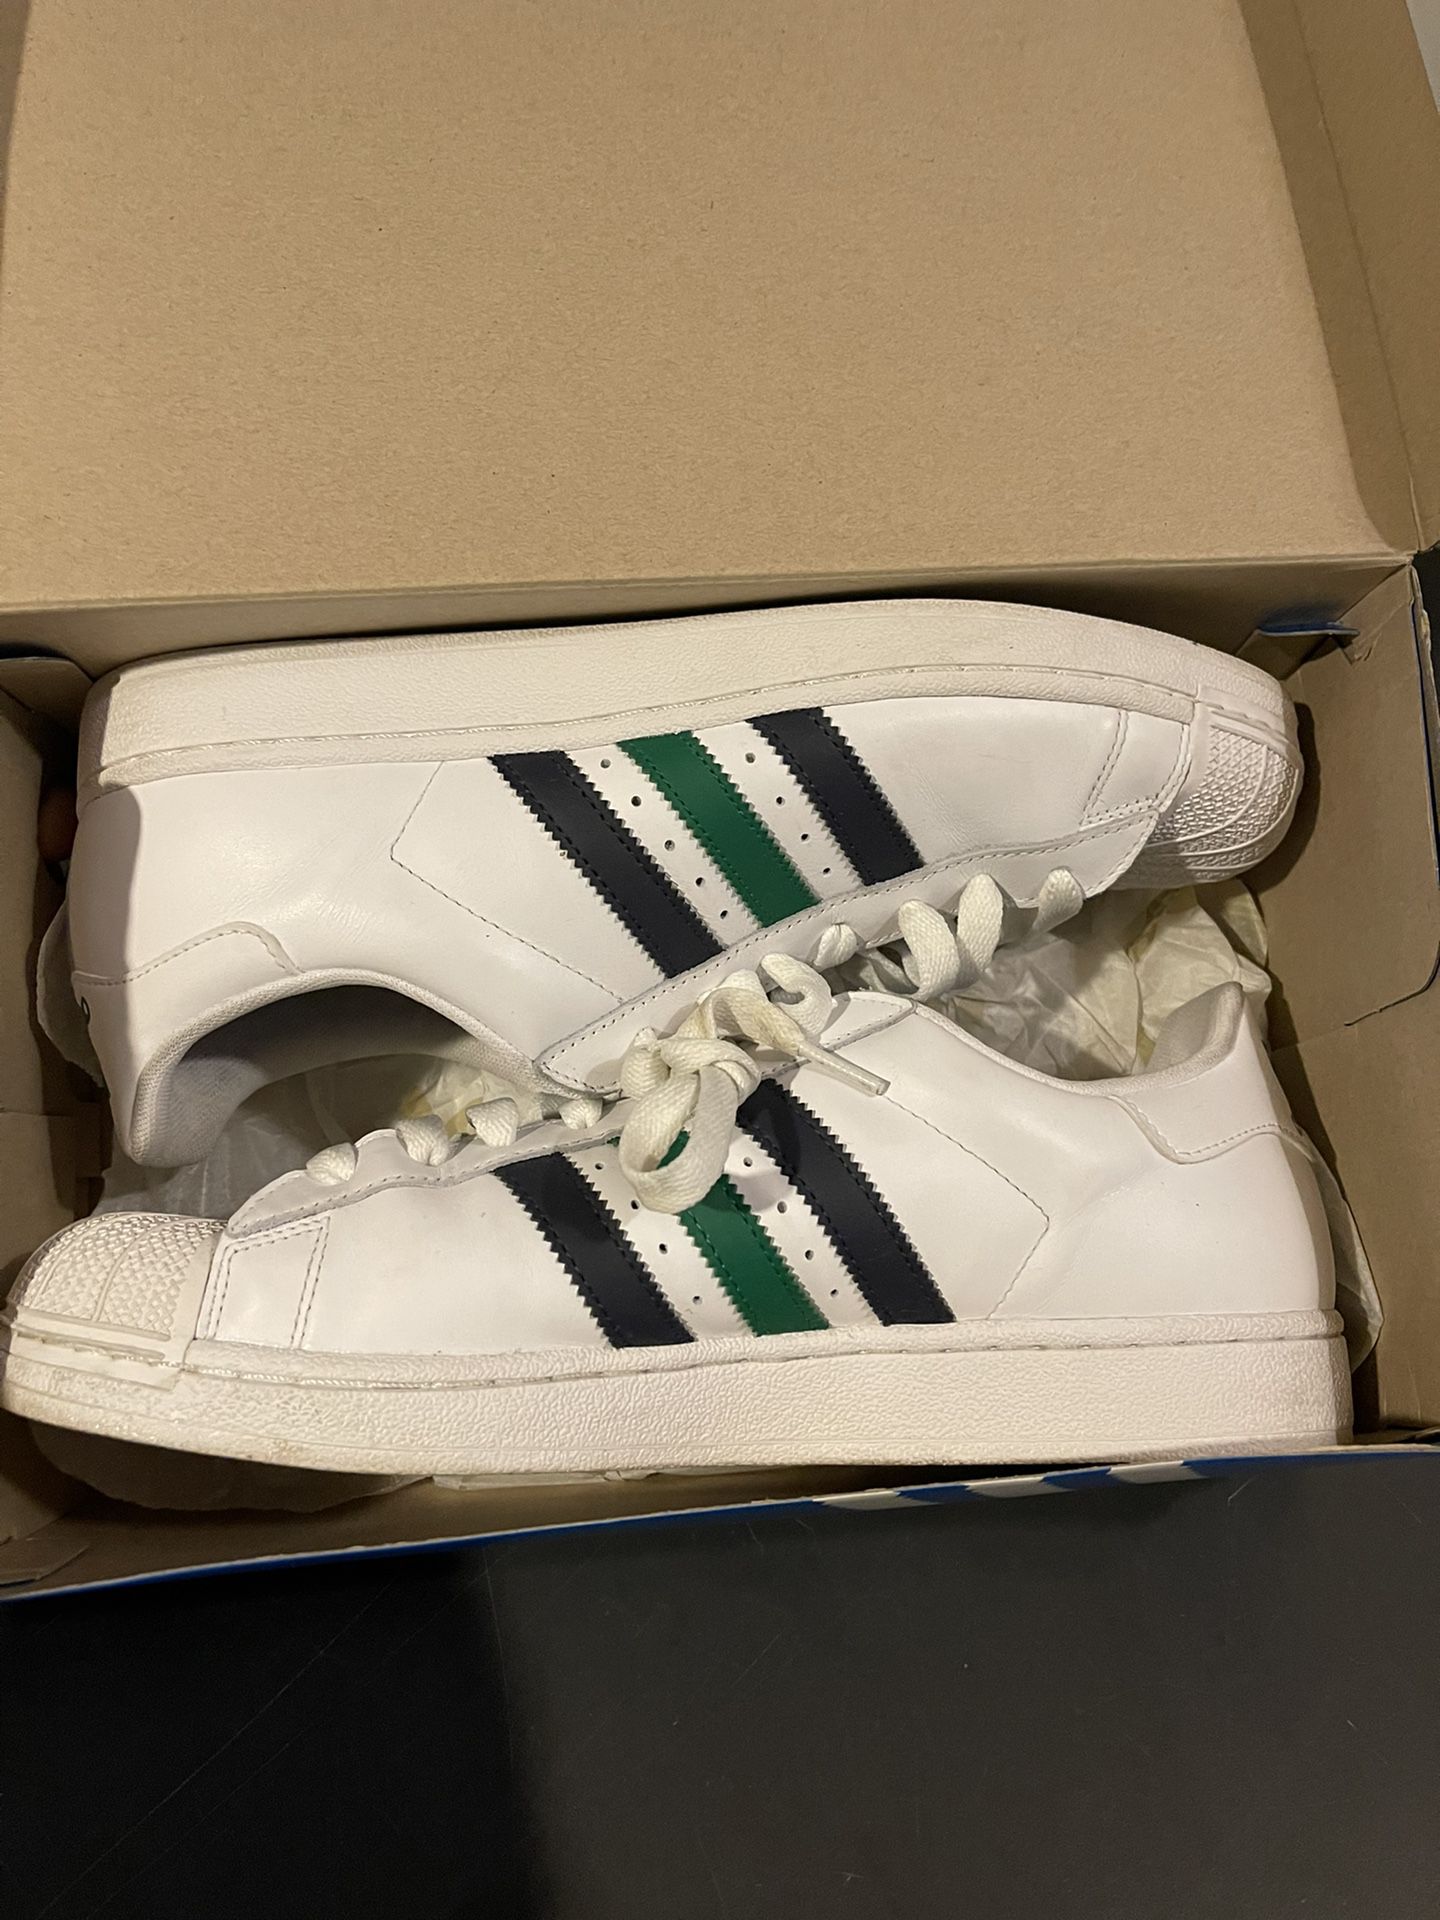 Adidas Superstar ll, White with Blue and Green Stripes